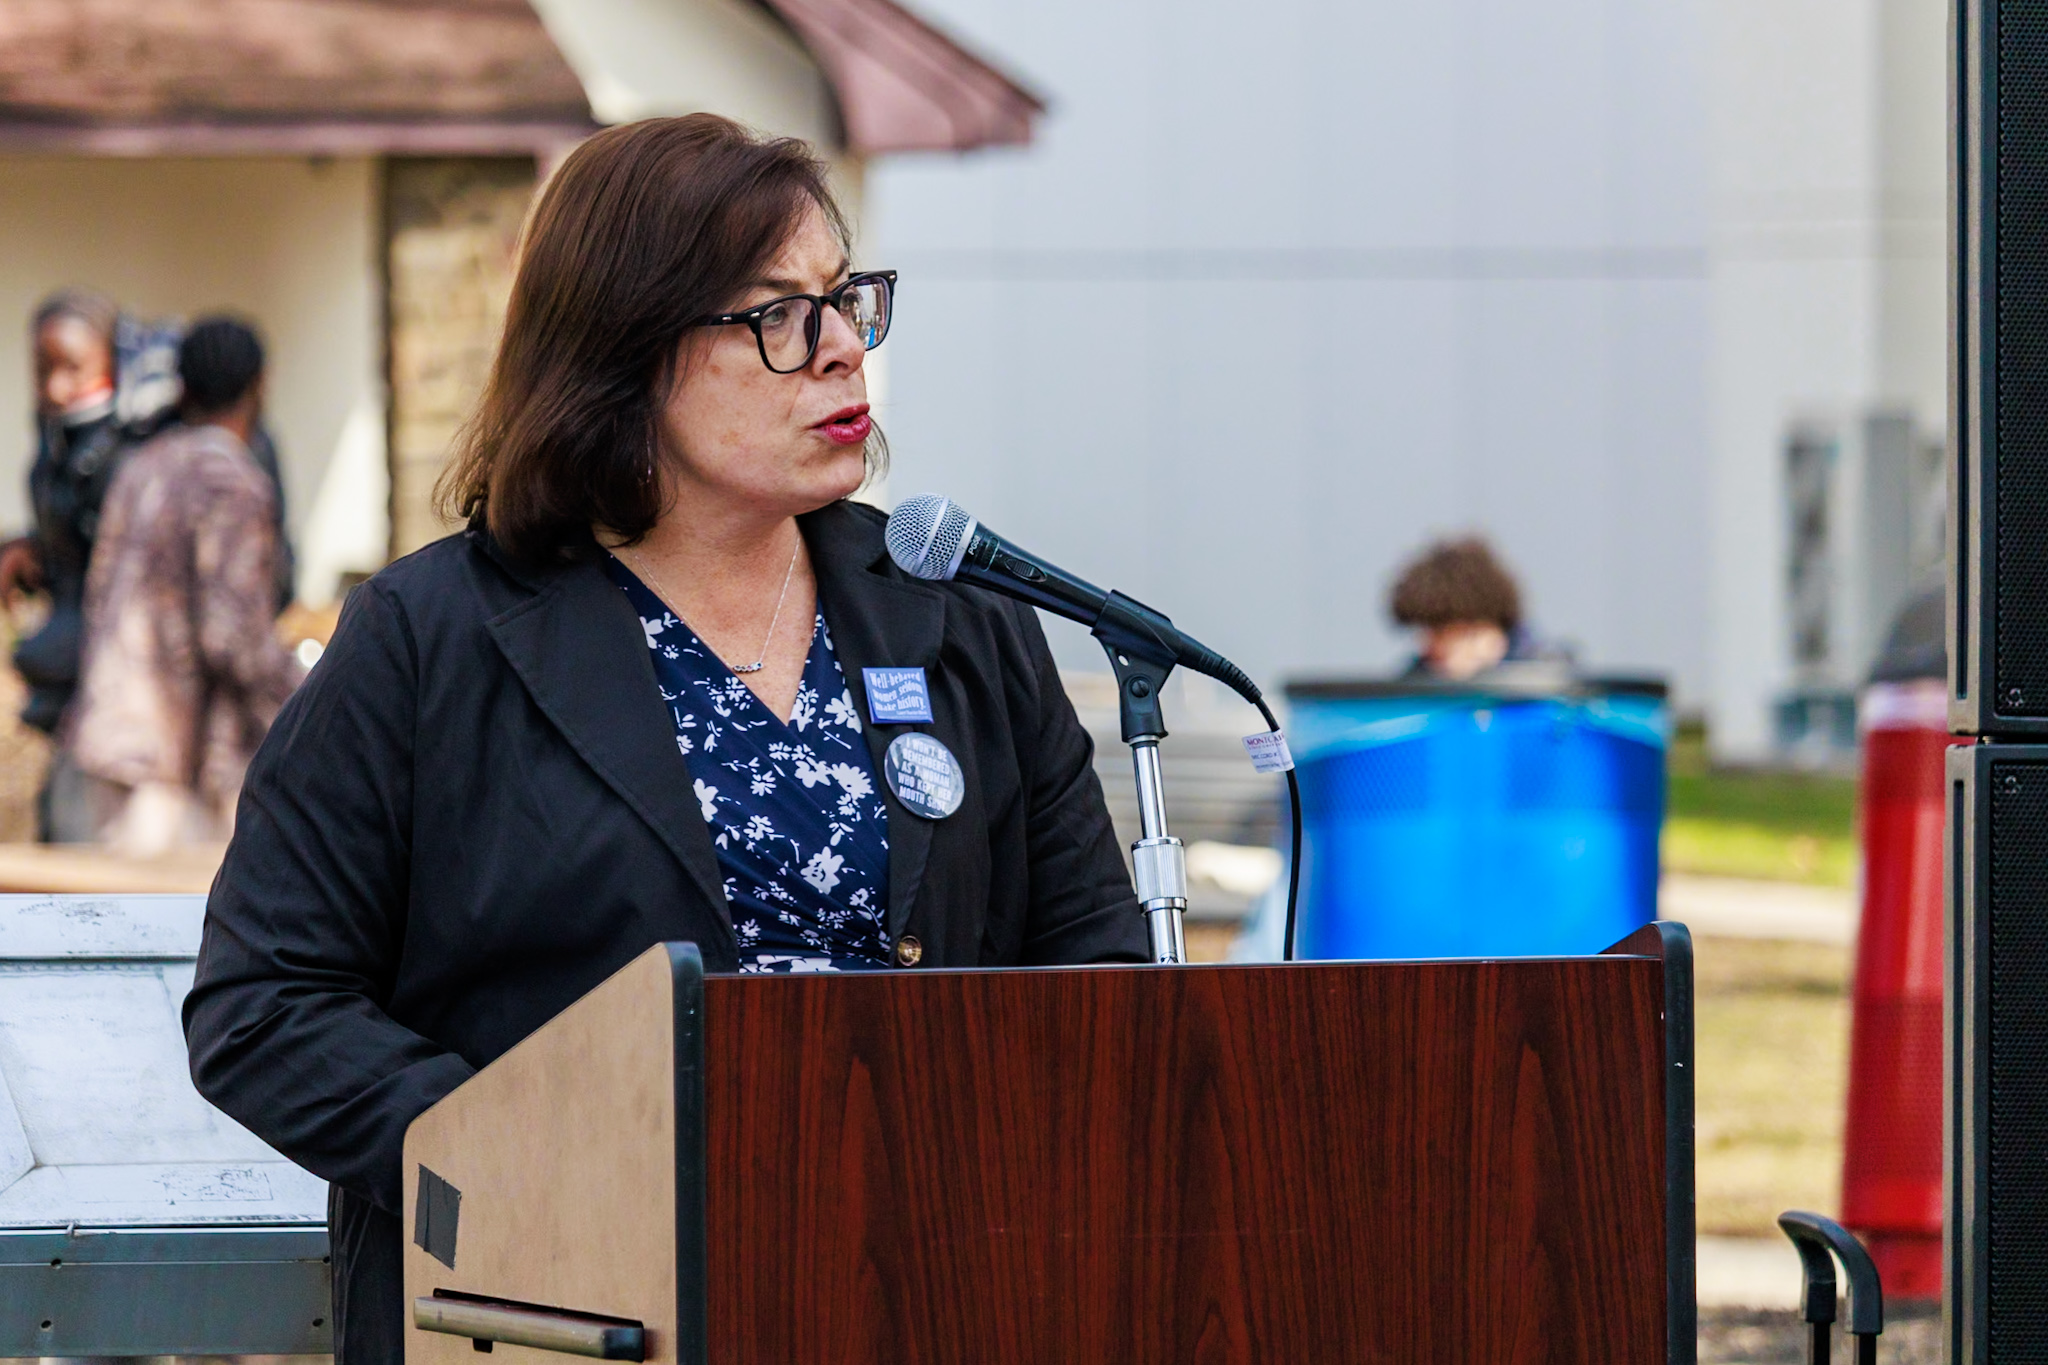 Dawn Soufleris, vice president for student development and campus life at Montclair State University, talks to students and faculty during the Women's History Month flag-raising event.
Sal DiMaggio | The Montclarion